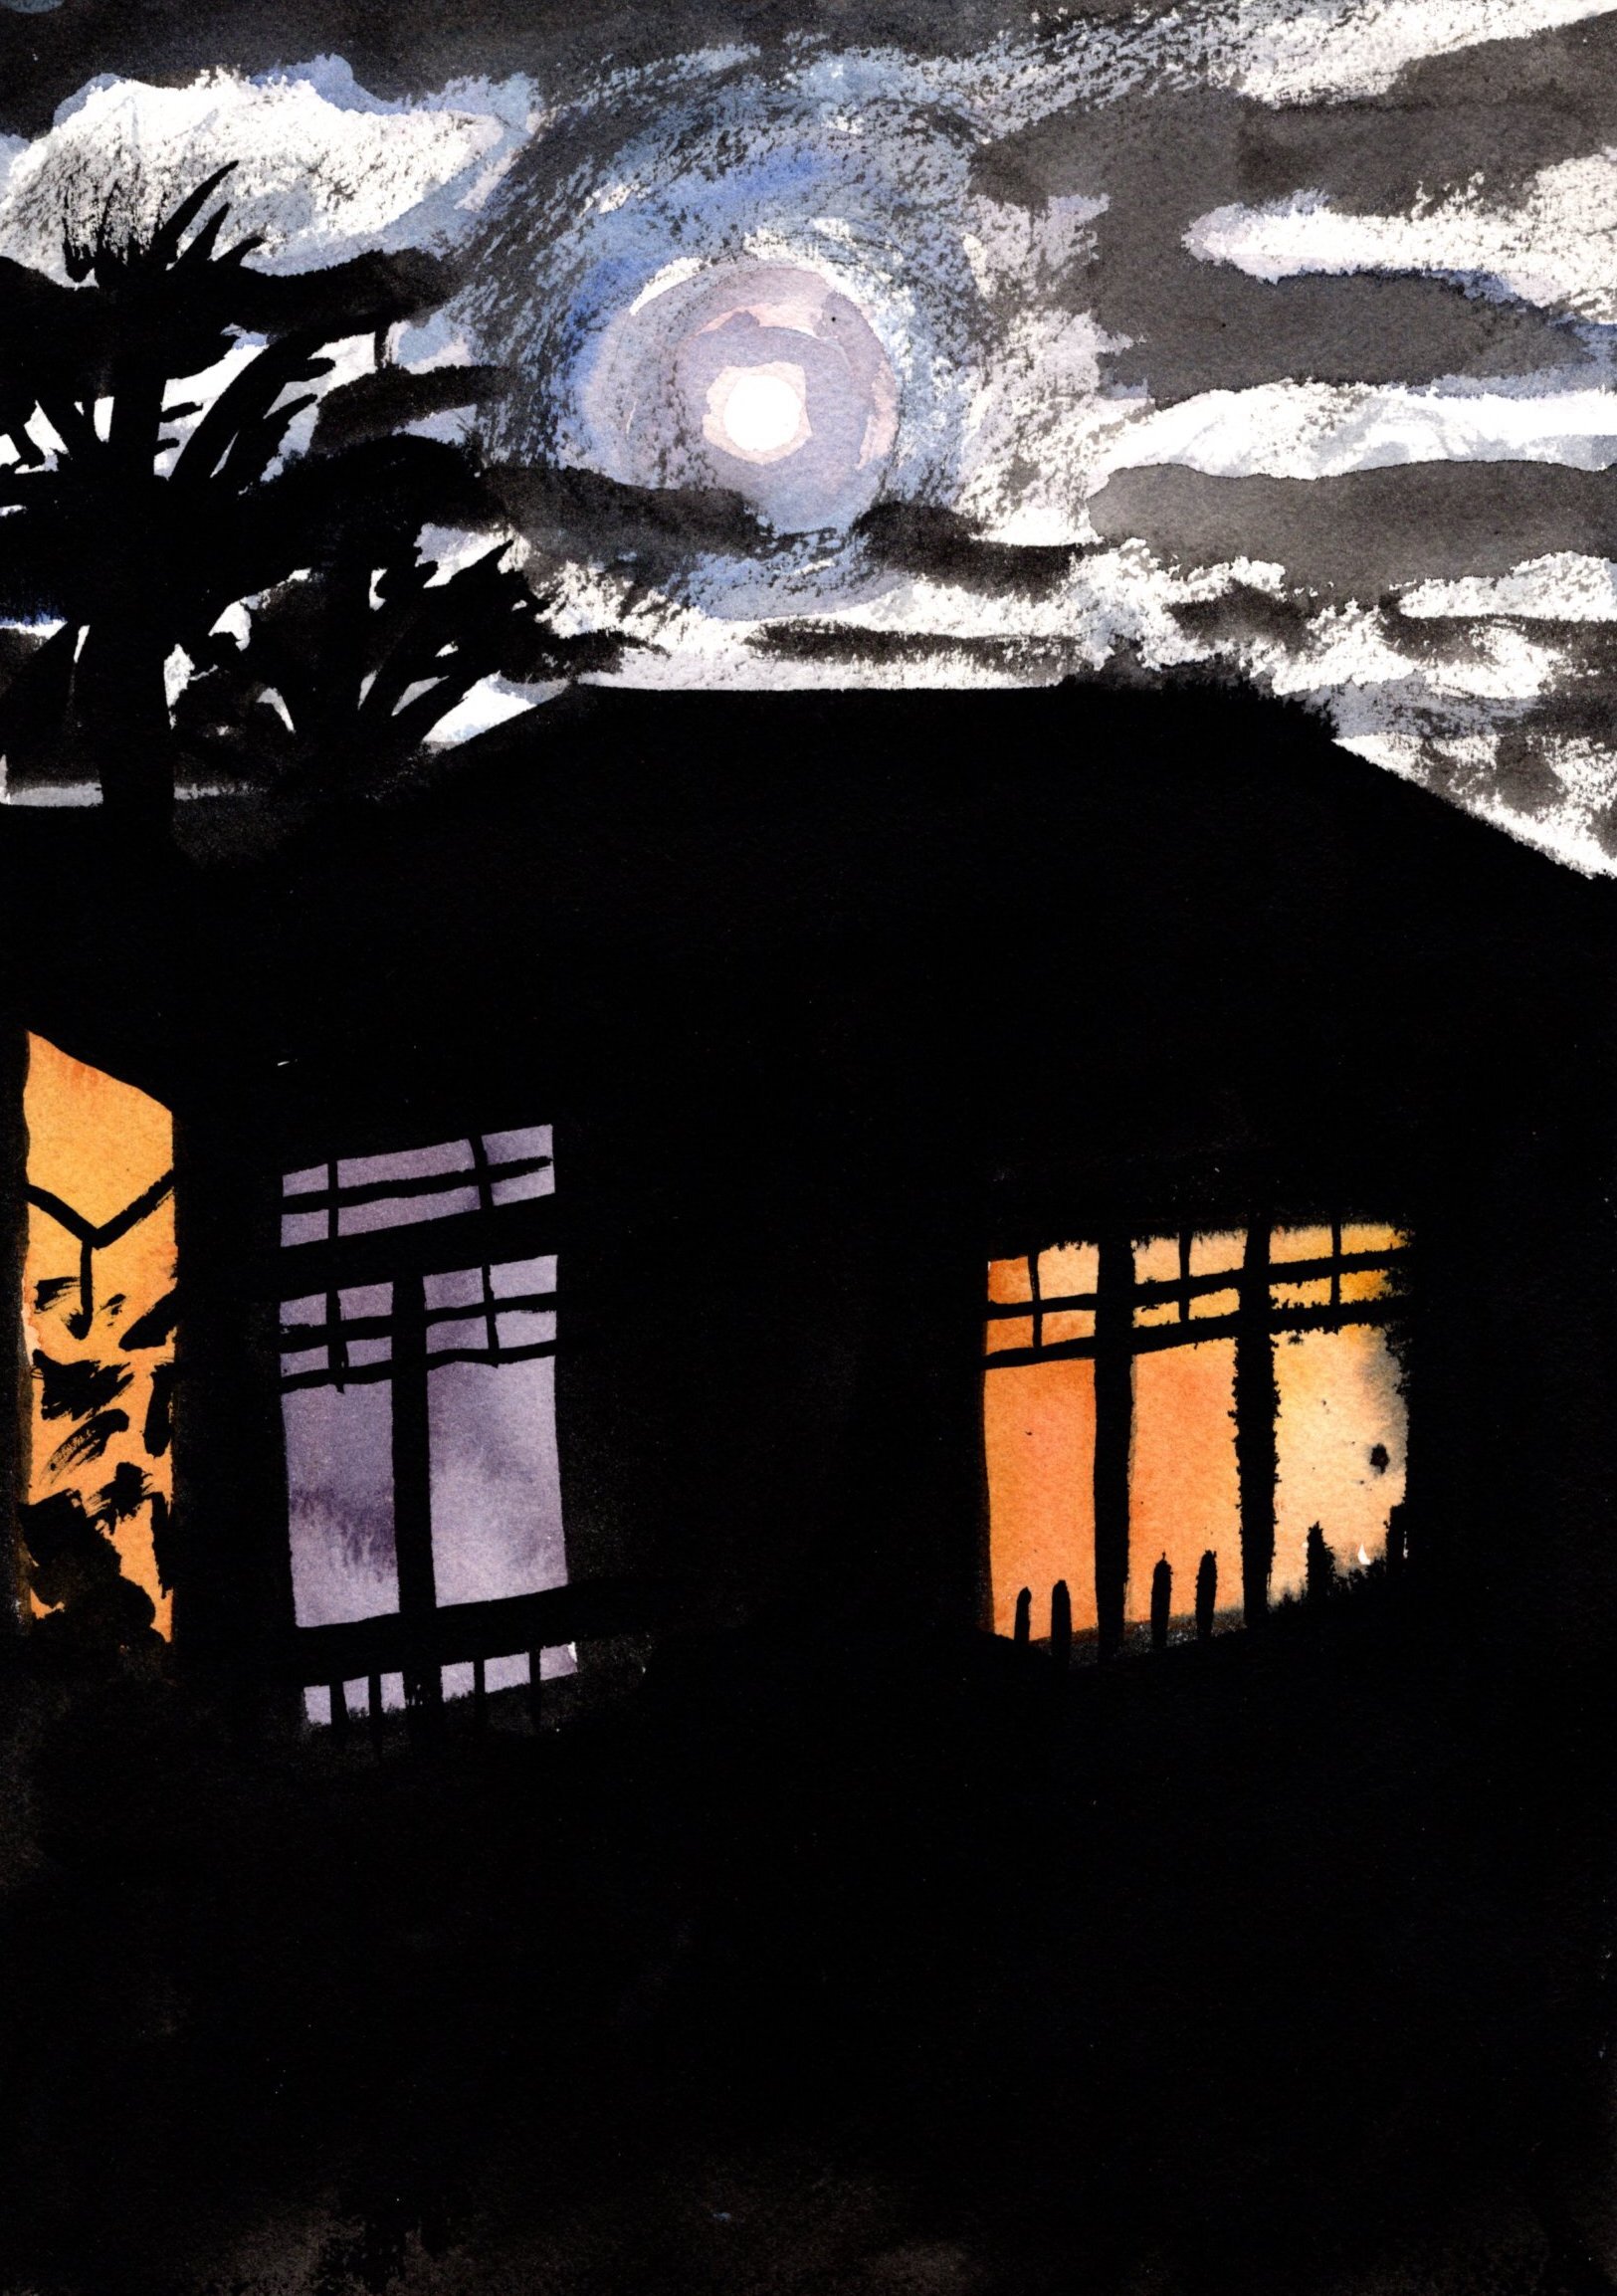 Website_Glowing windows at night_2018_Watercolour & Ink on paper_A4 copy.jpg